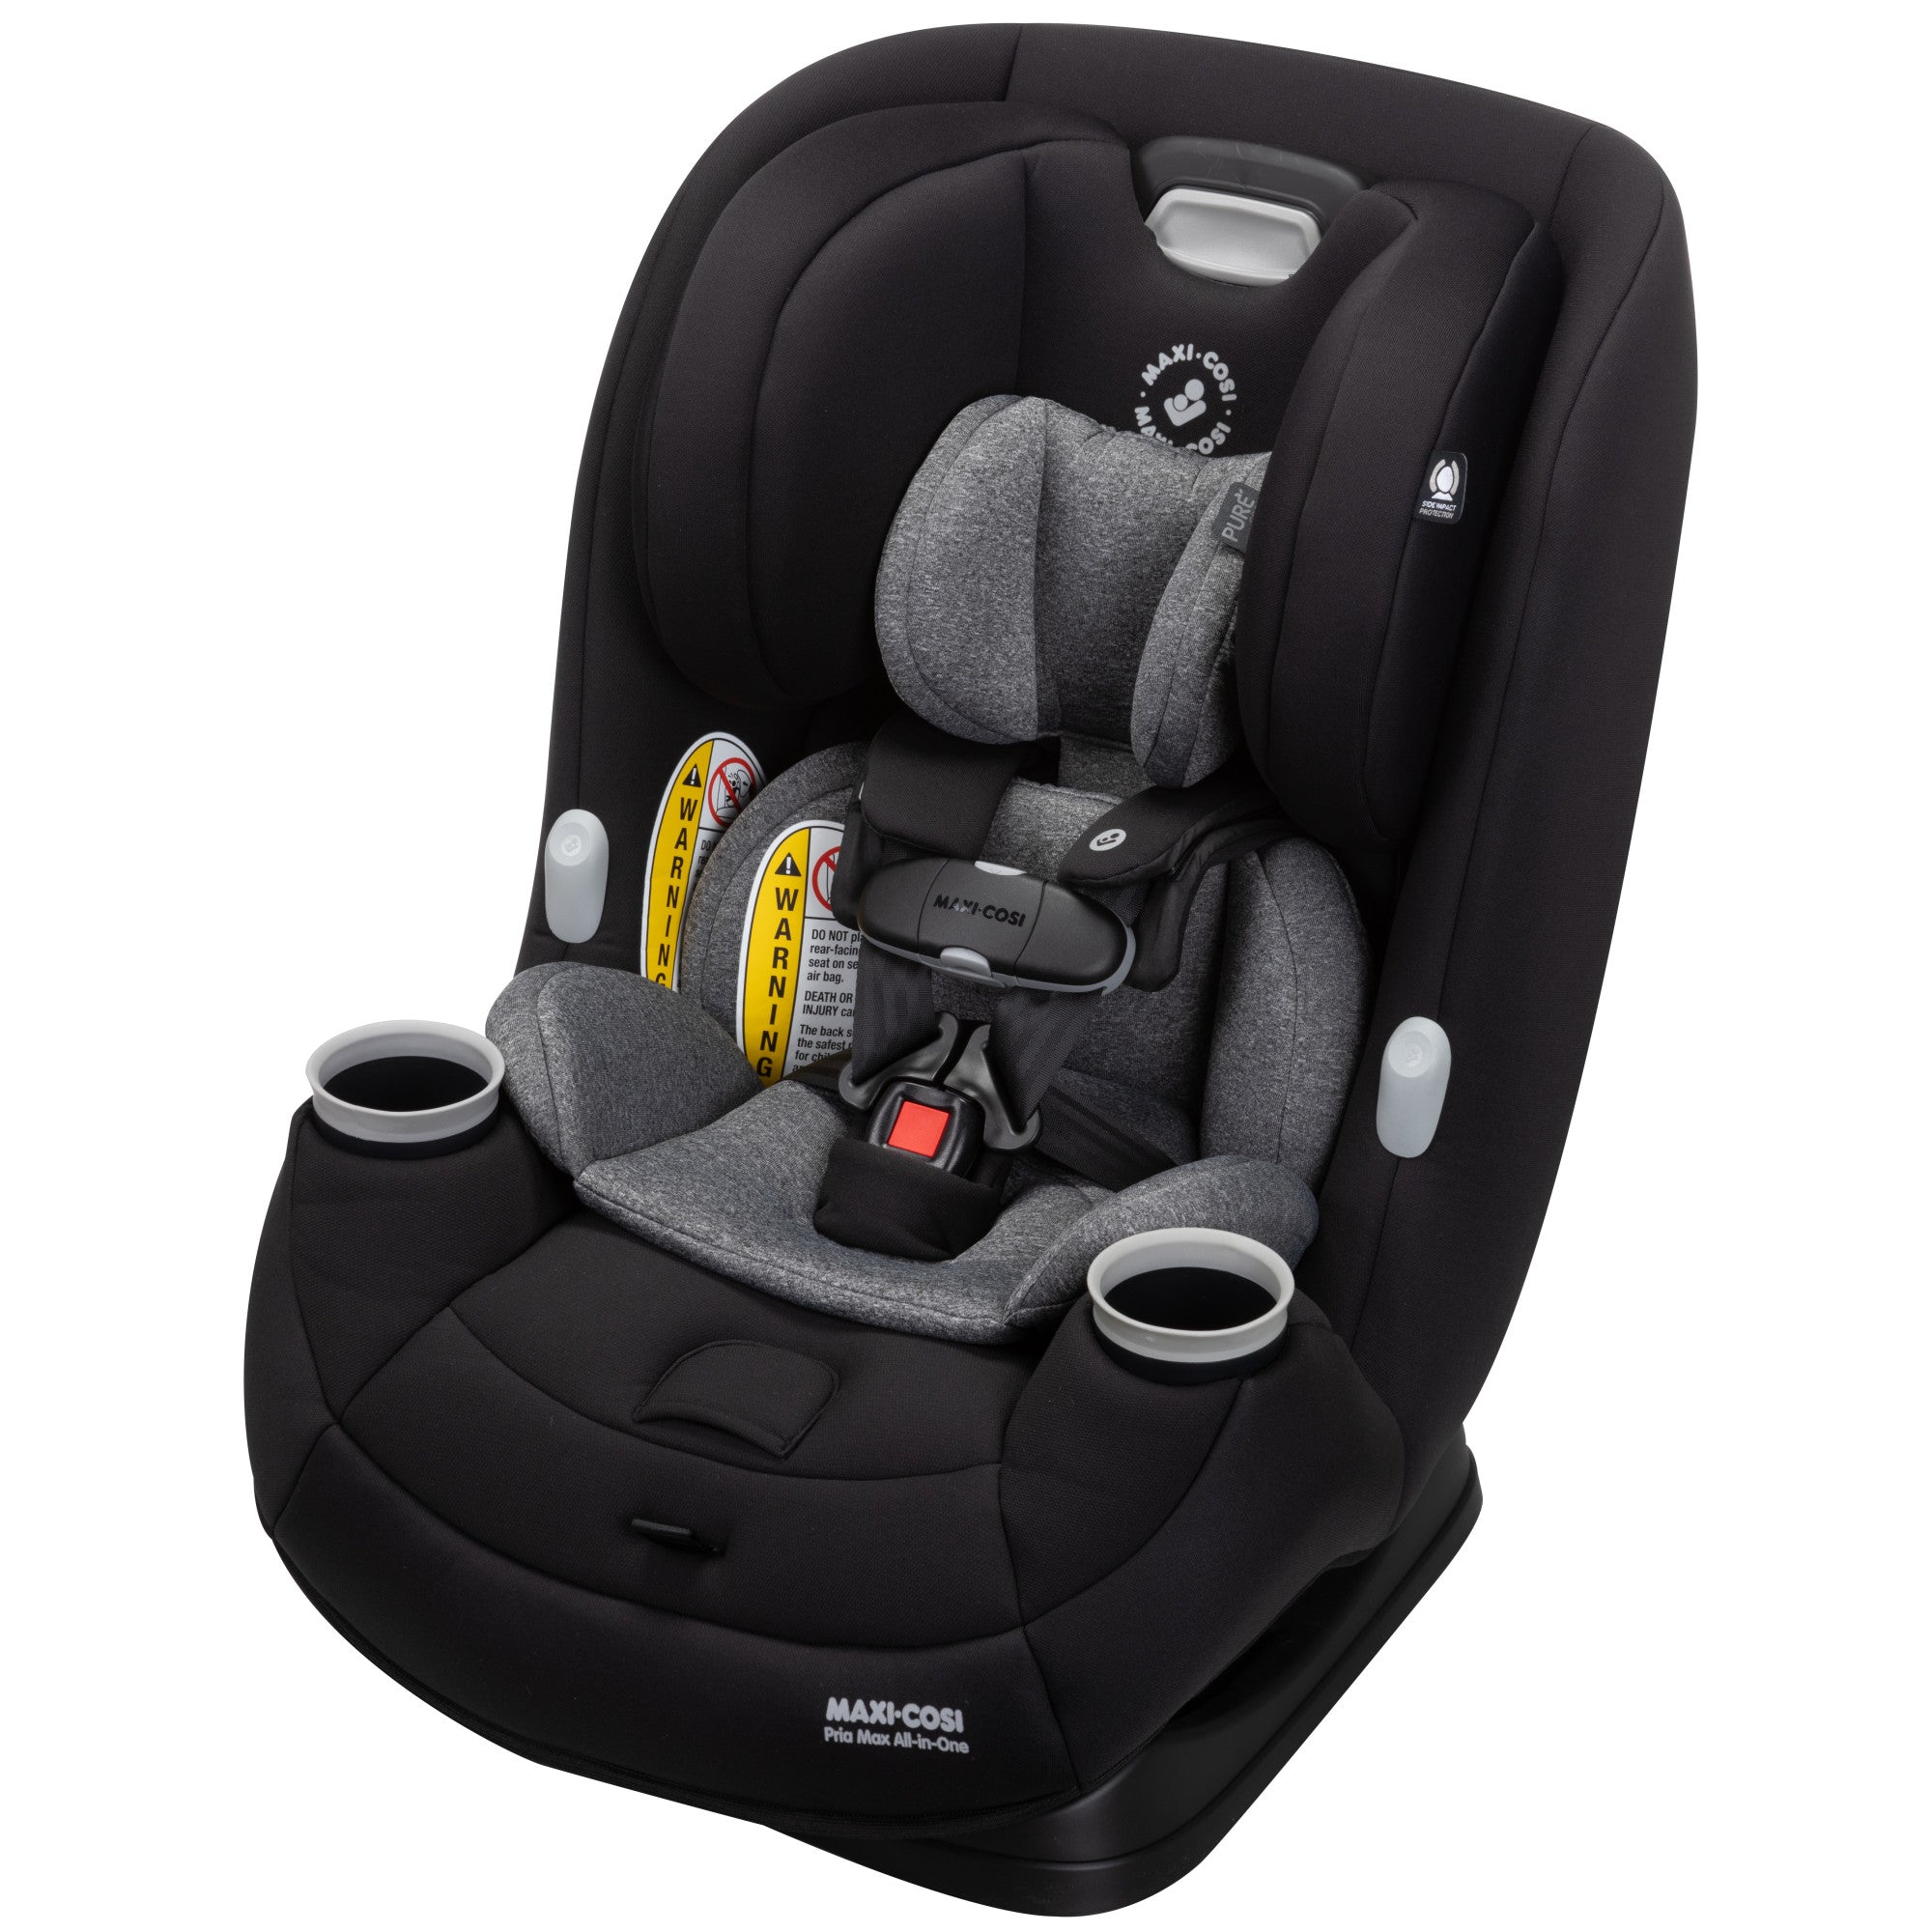 Pria™ Max All-in-One Convertible Car Seat - Essential Black - 45 degree angle view of left side